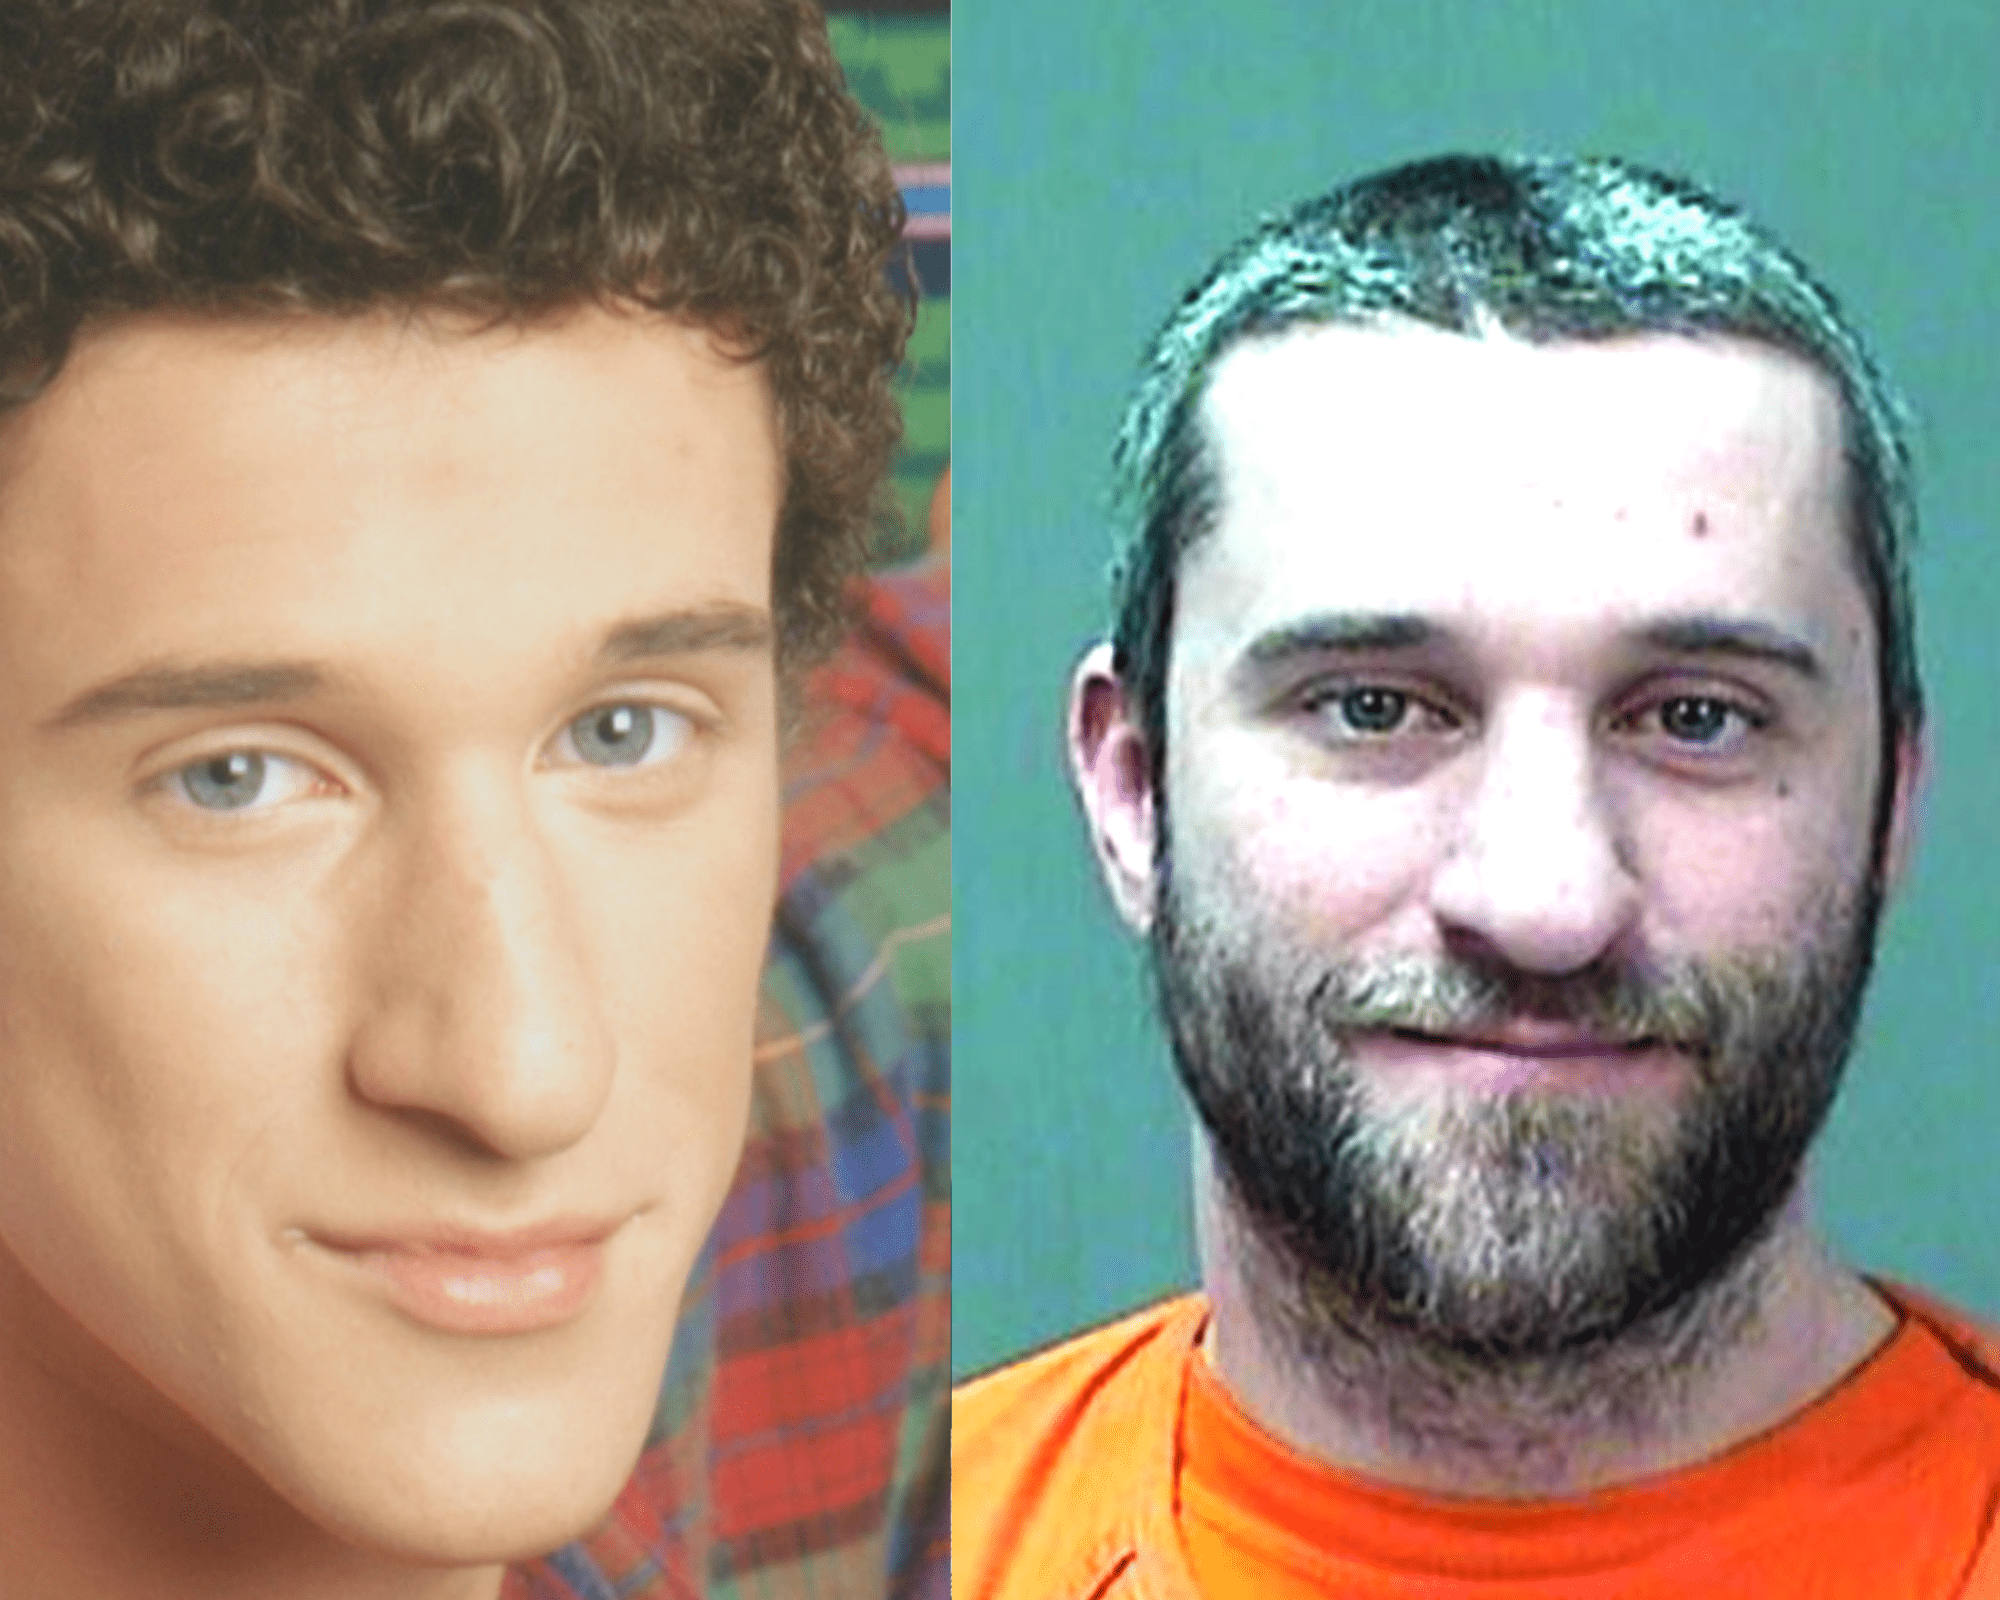 El actor de “Saved By the Bell” Dustin Diamond. | Foto: twitter.com/pagesix | twitter.com/brobible